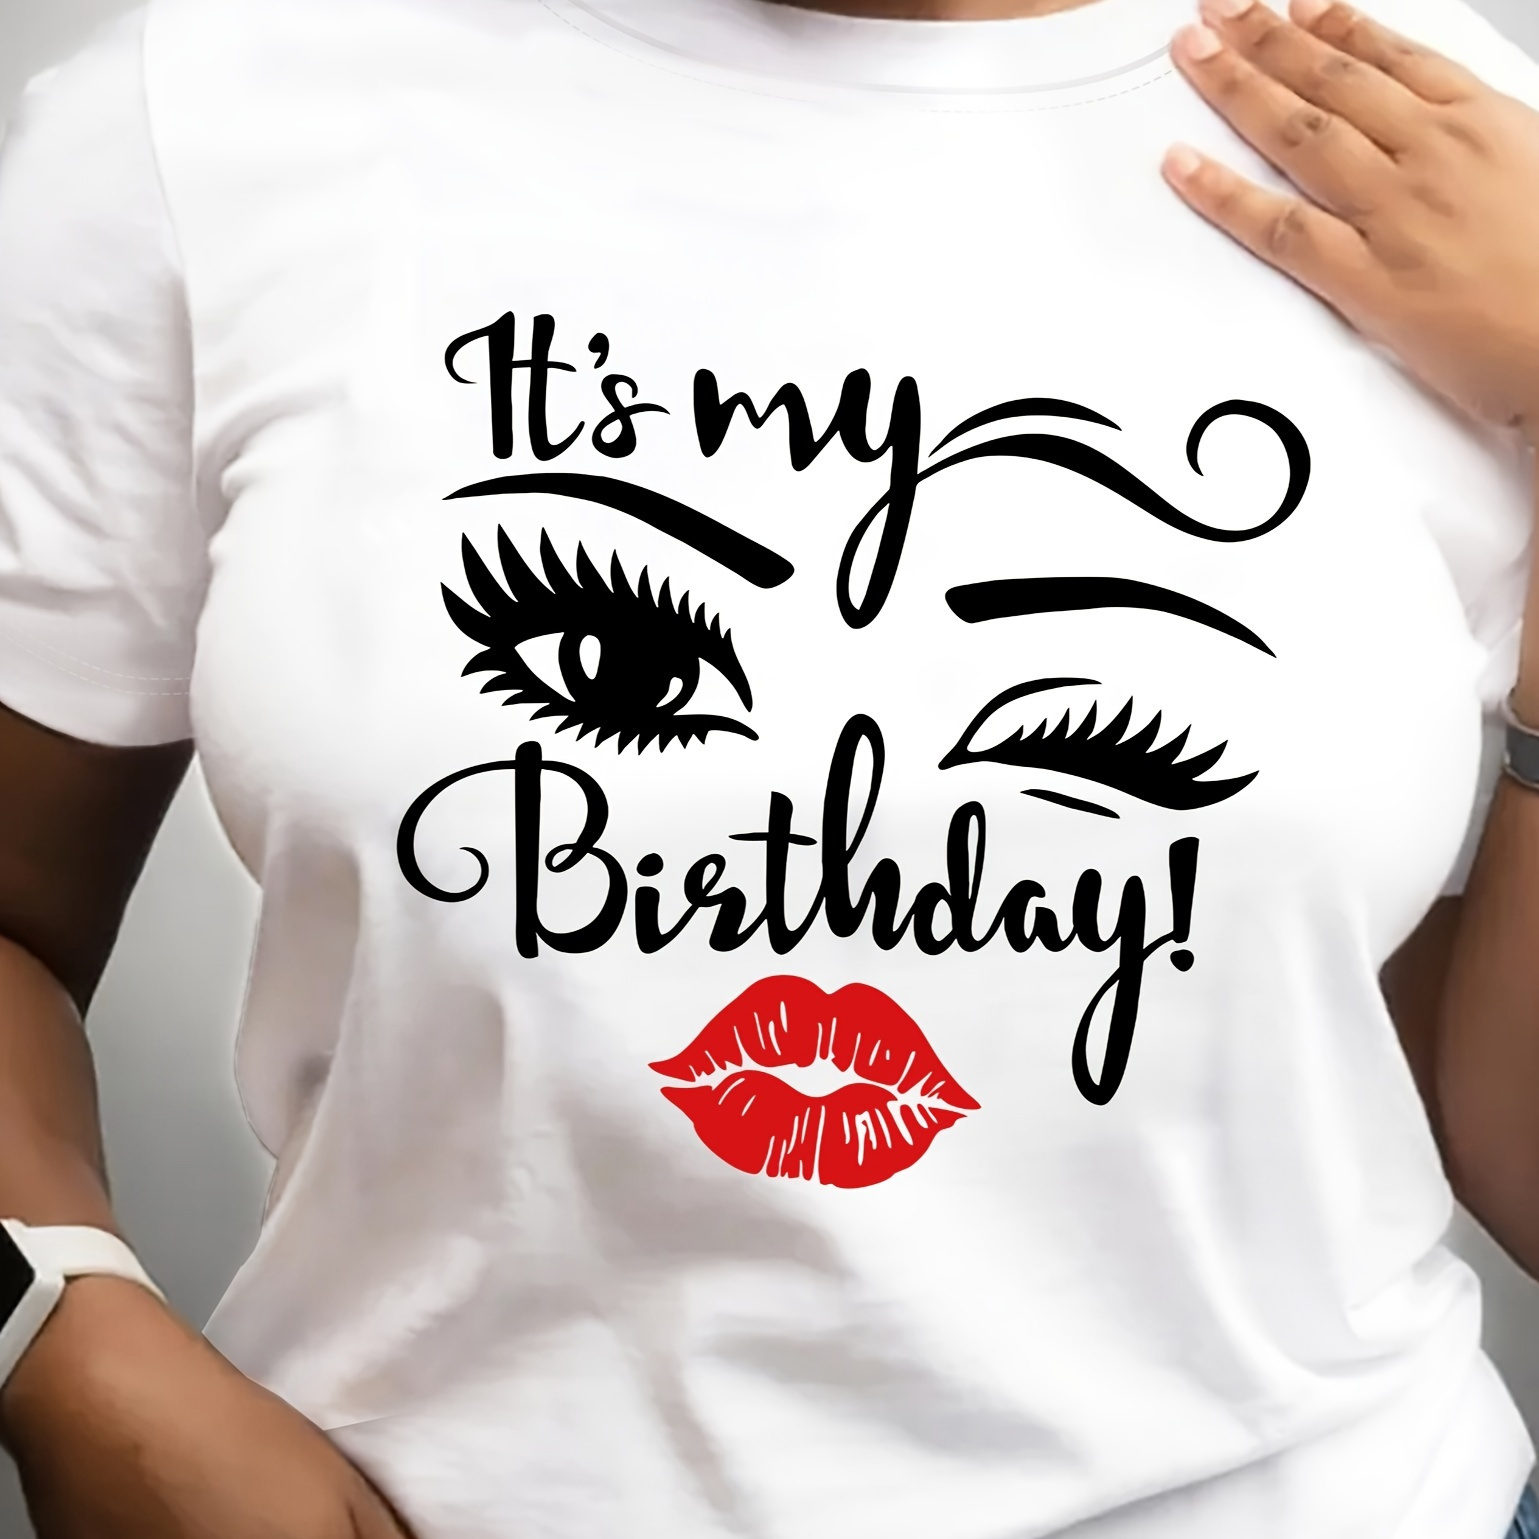 

It's My Birthday Print T-shirt, Casual Crew Neck Short Sleeve Top For Spring & Summer, Women's Clothing